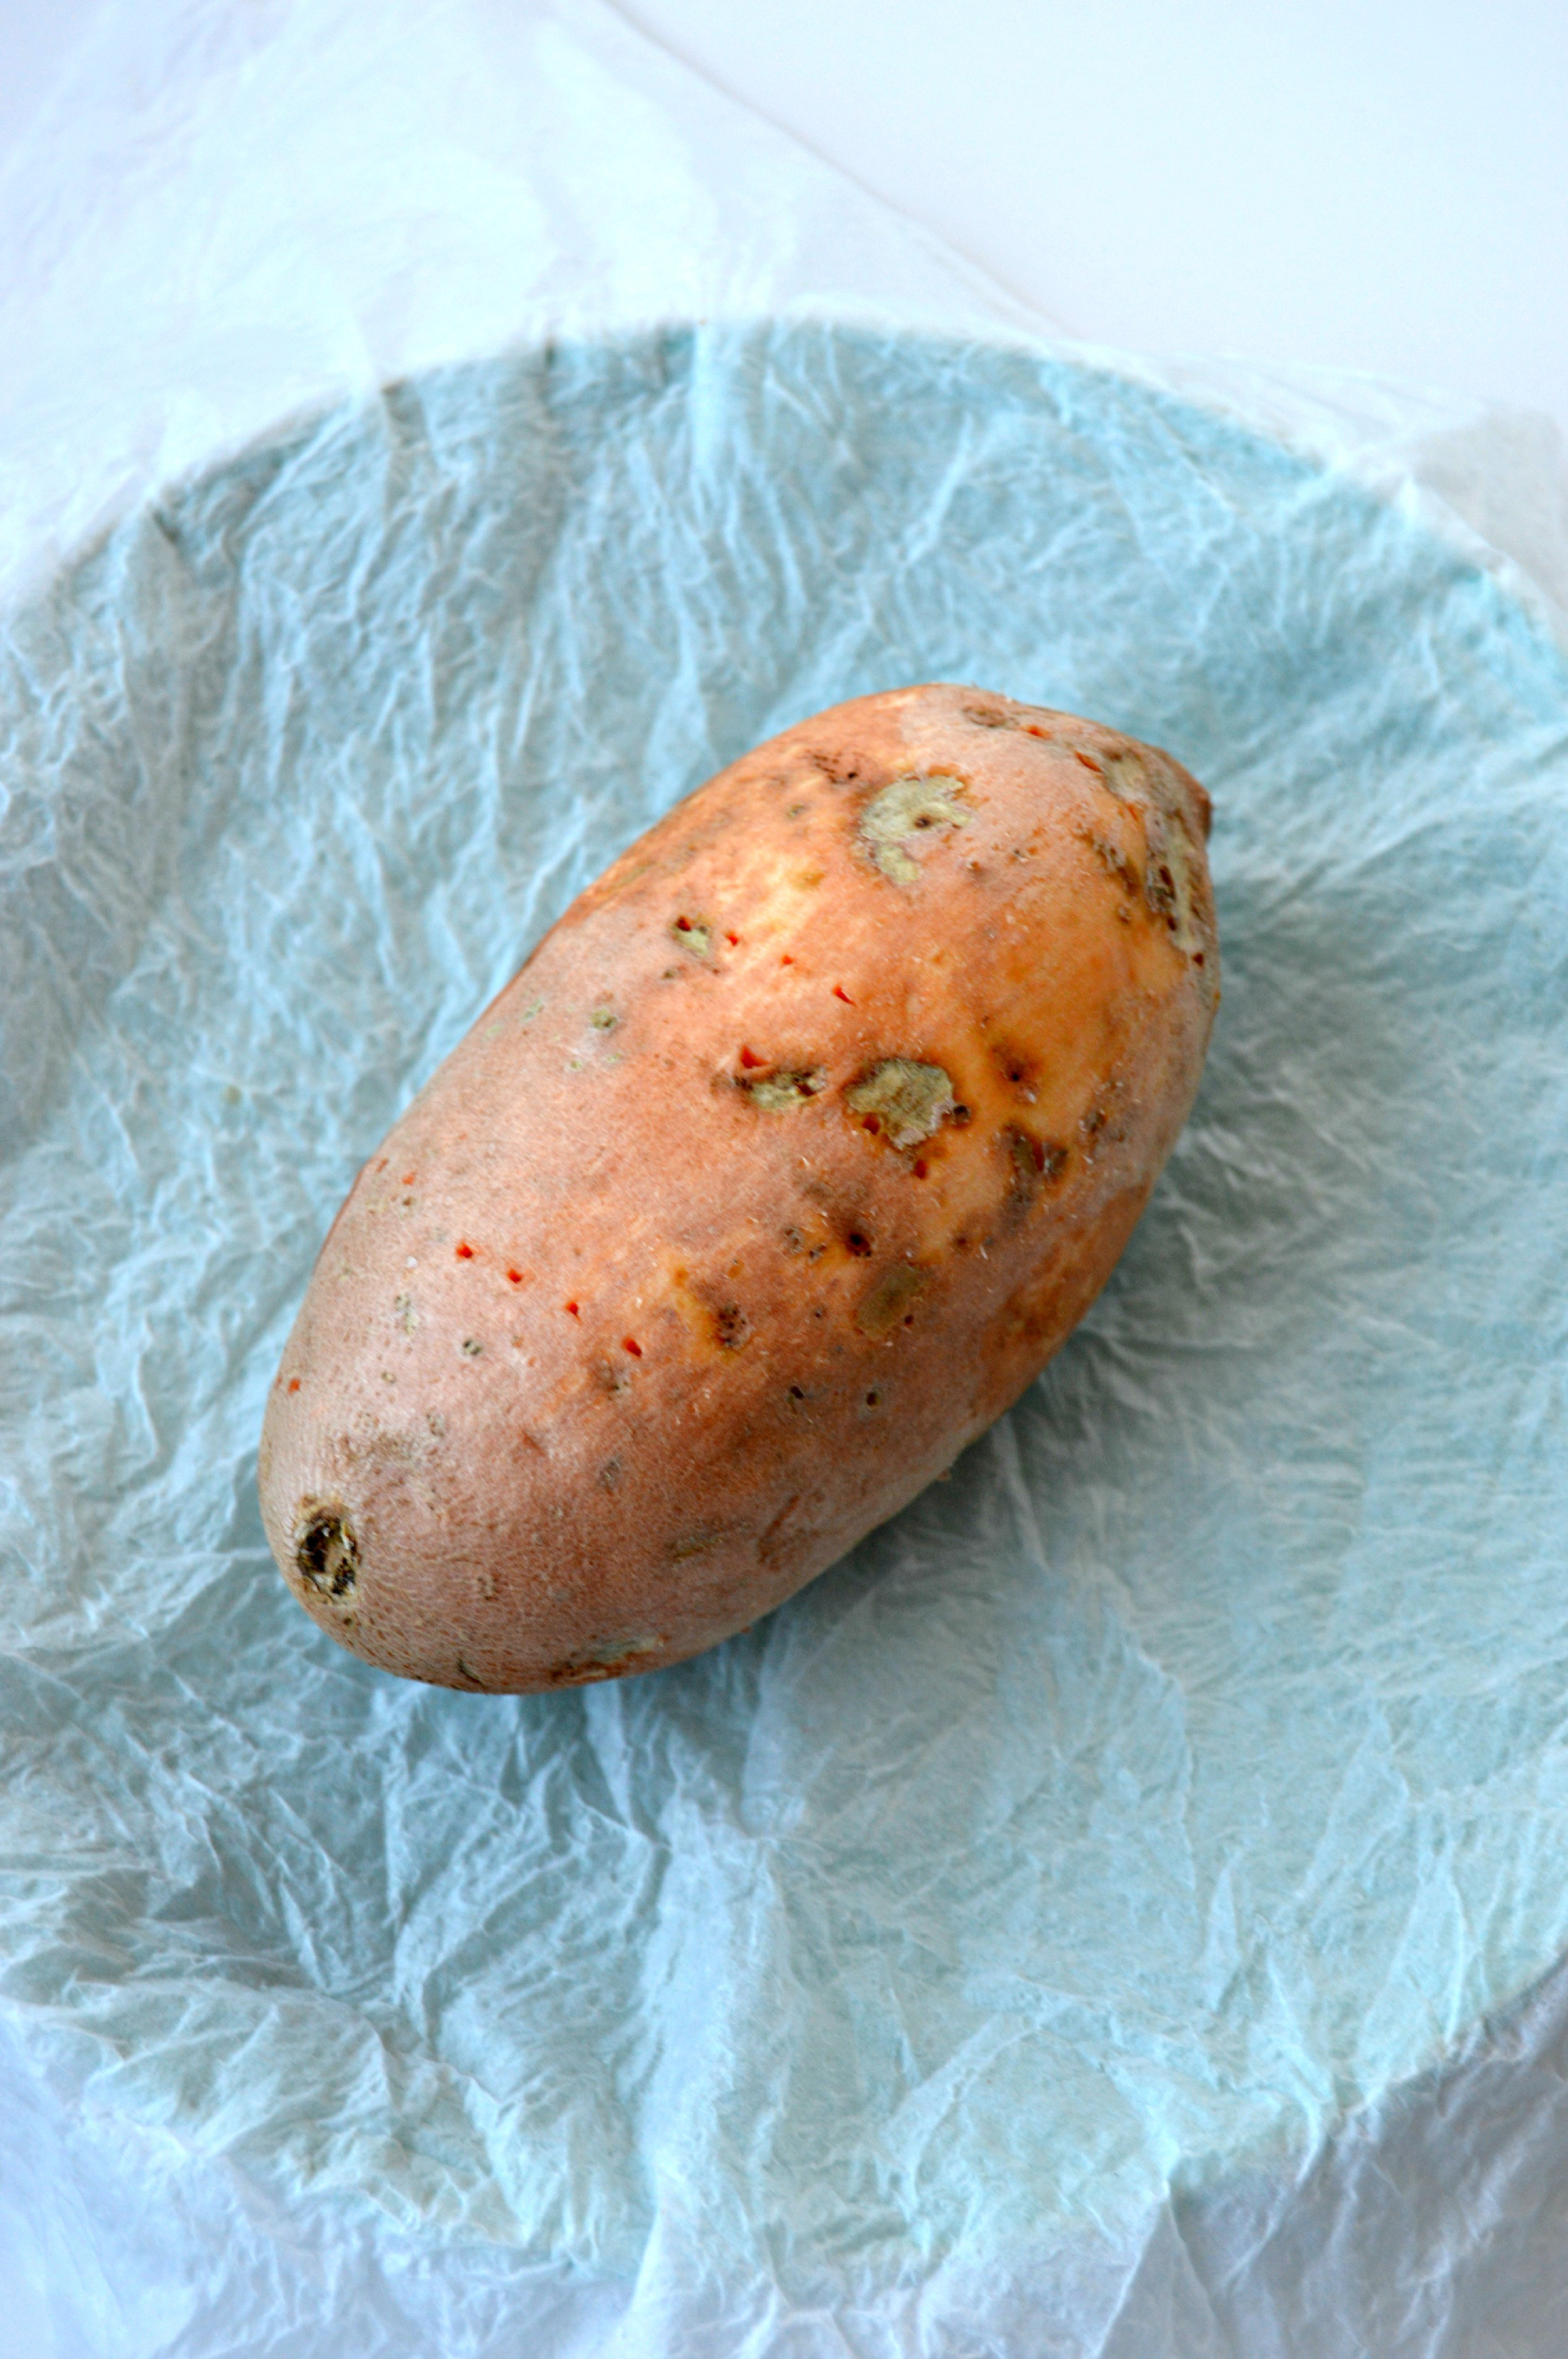 How To Cook Sweet Potato In Microwave
 How to Make a Baked Sweet Potato in the Microwave Clean